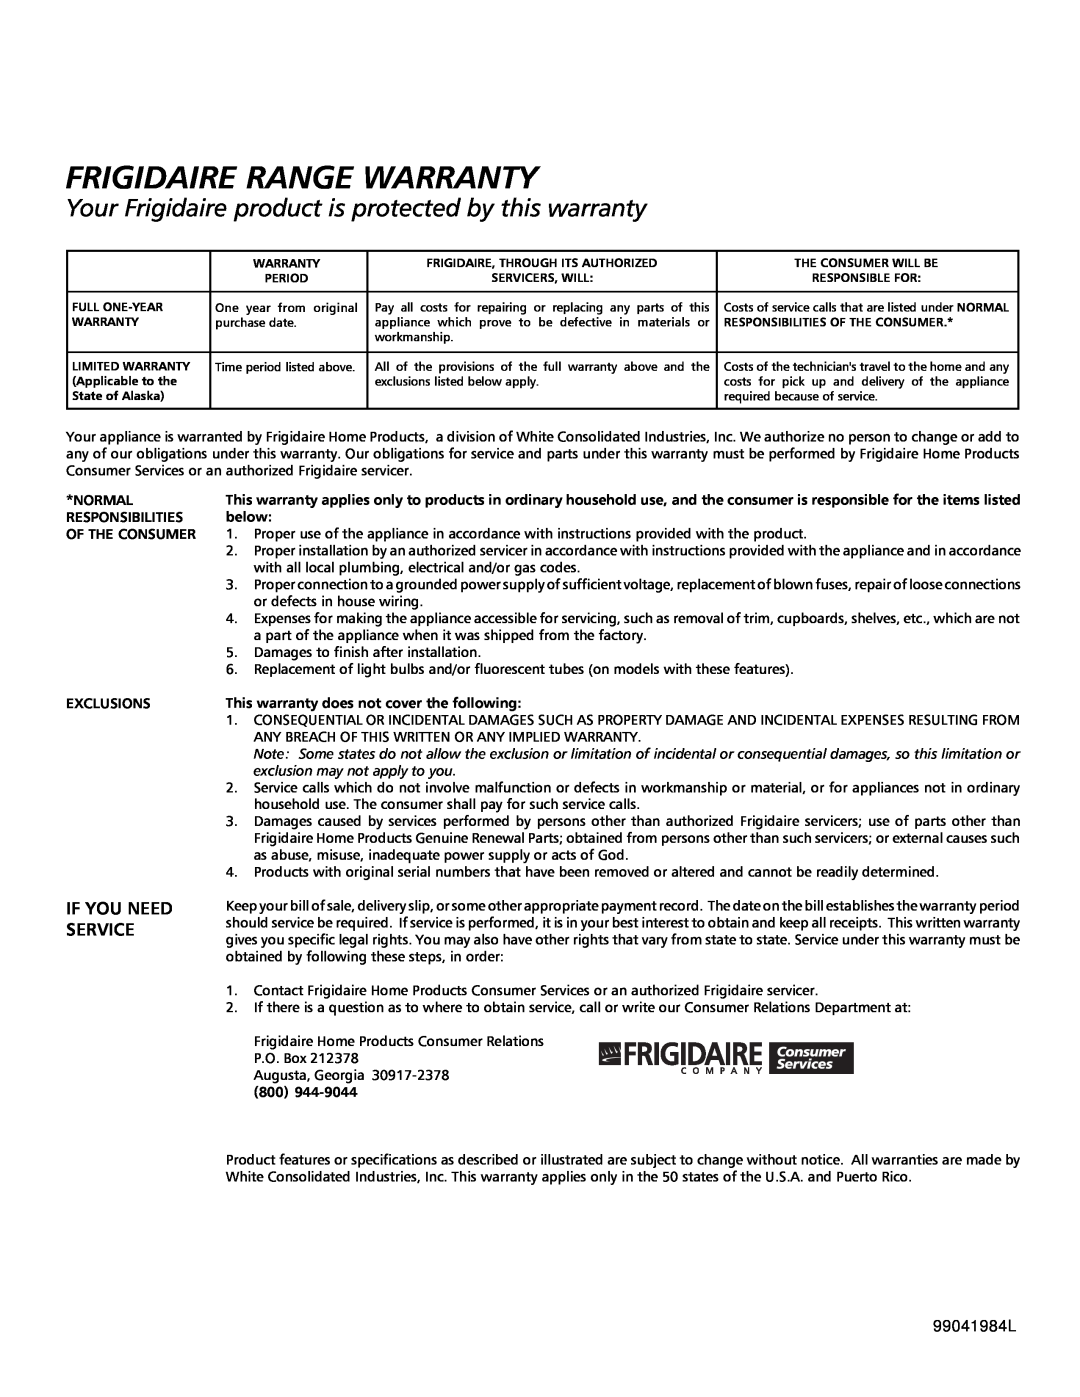 Frigidaire HV2736B Frigidaire Range Warranty, If You Need Service, Normal, Responsibilities, below, Of The Consumer 